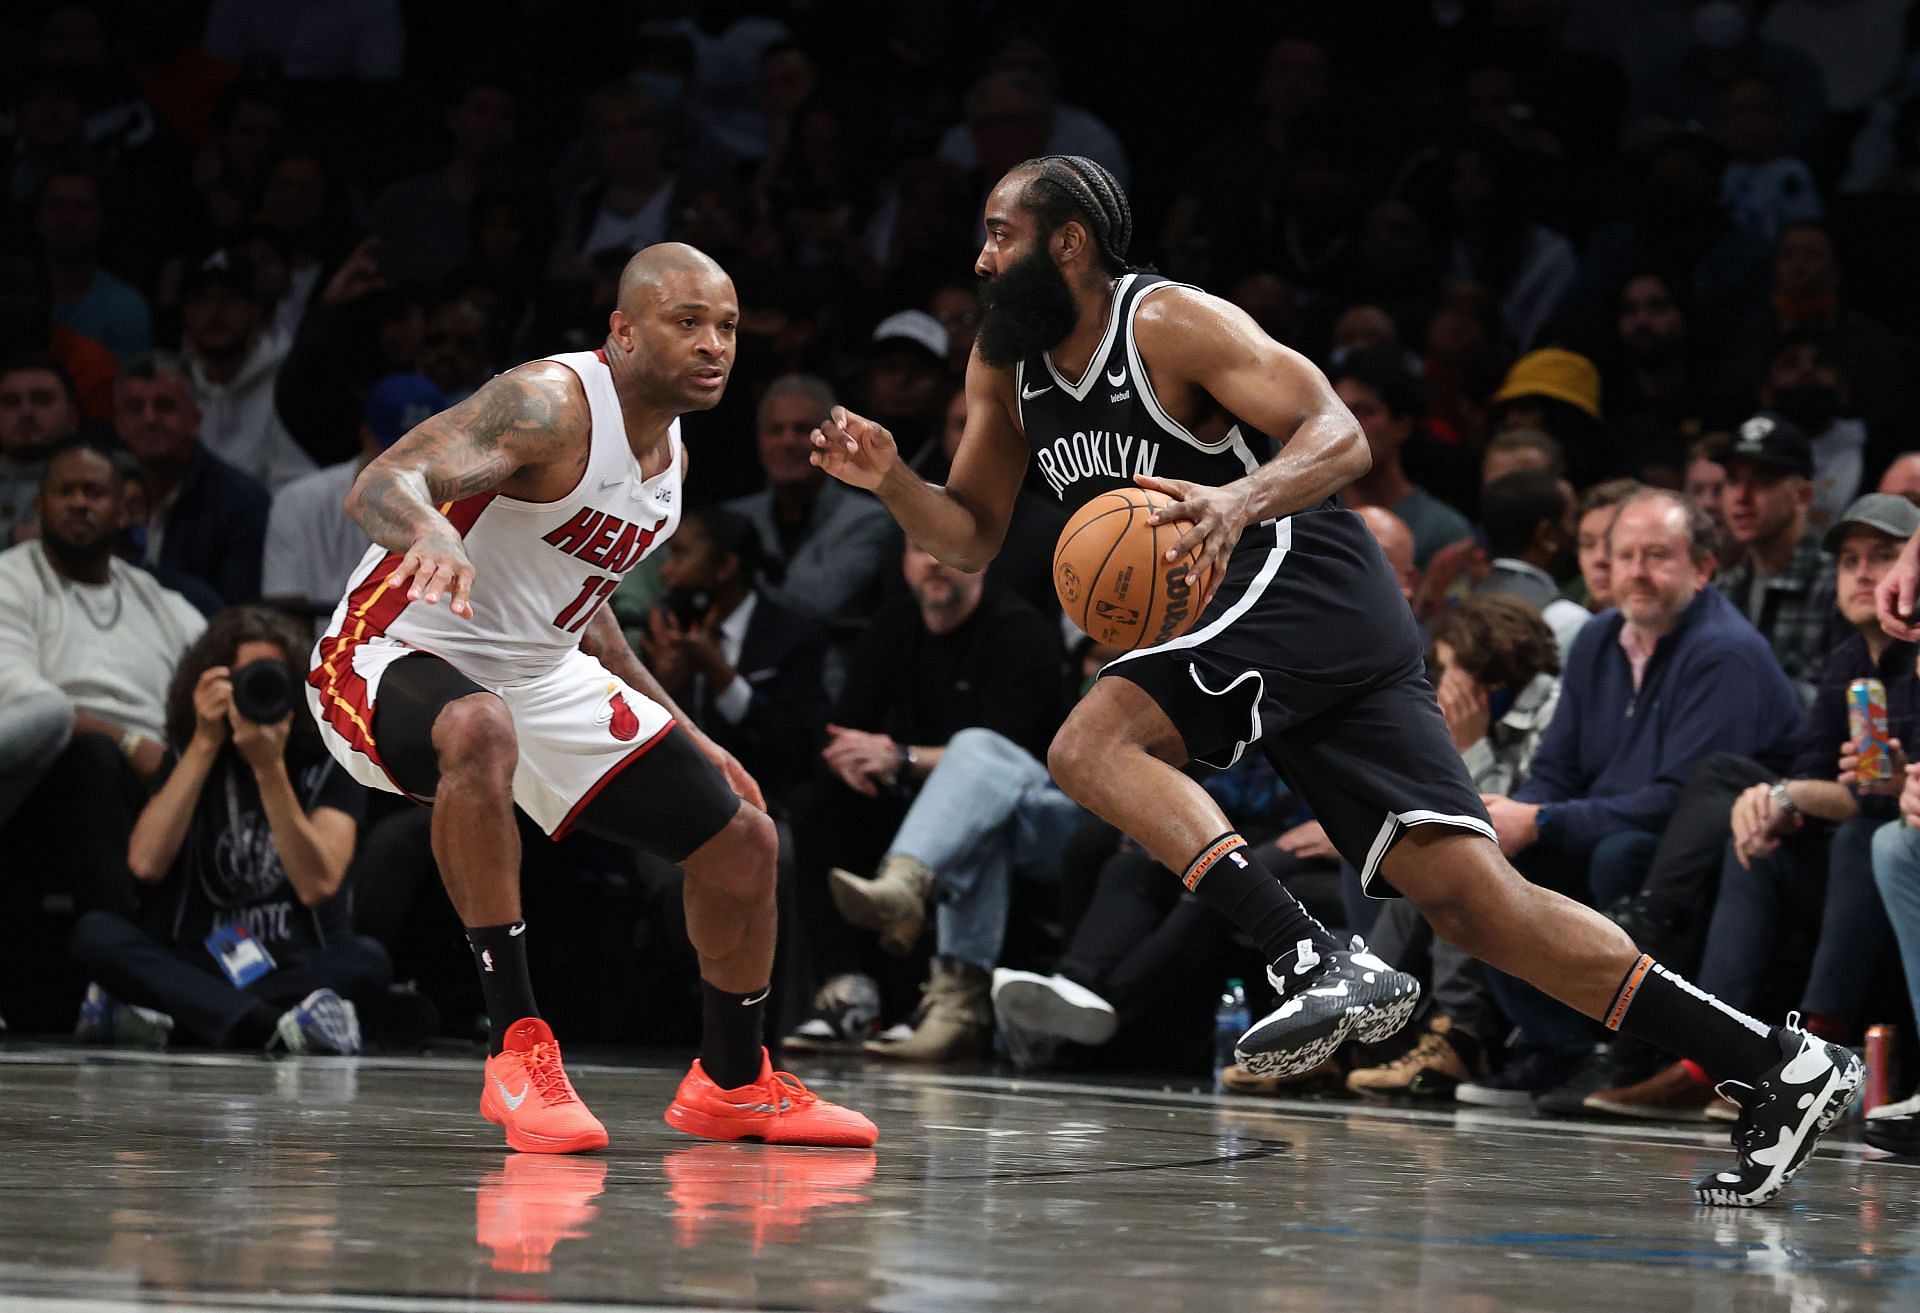 James Harden #13 of the Brooklyn Nets drives against P.J. Tucker #17 of the Miami Heat during their game at Barclays Center on October 27, 2021 in New York City.